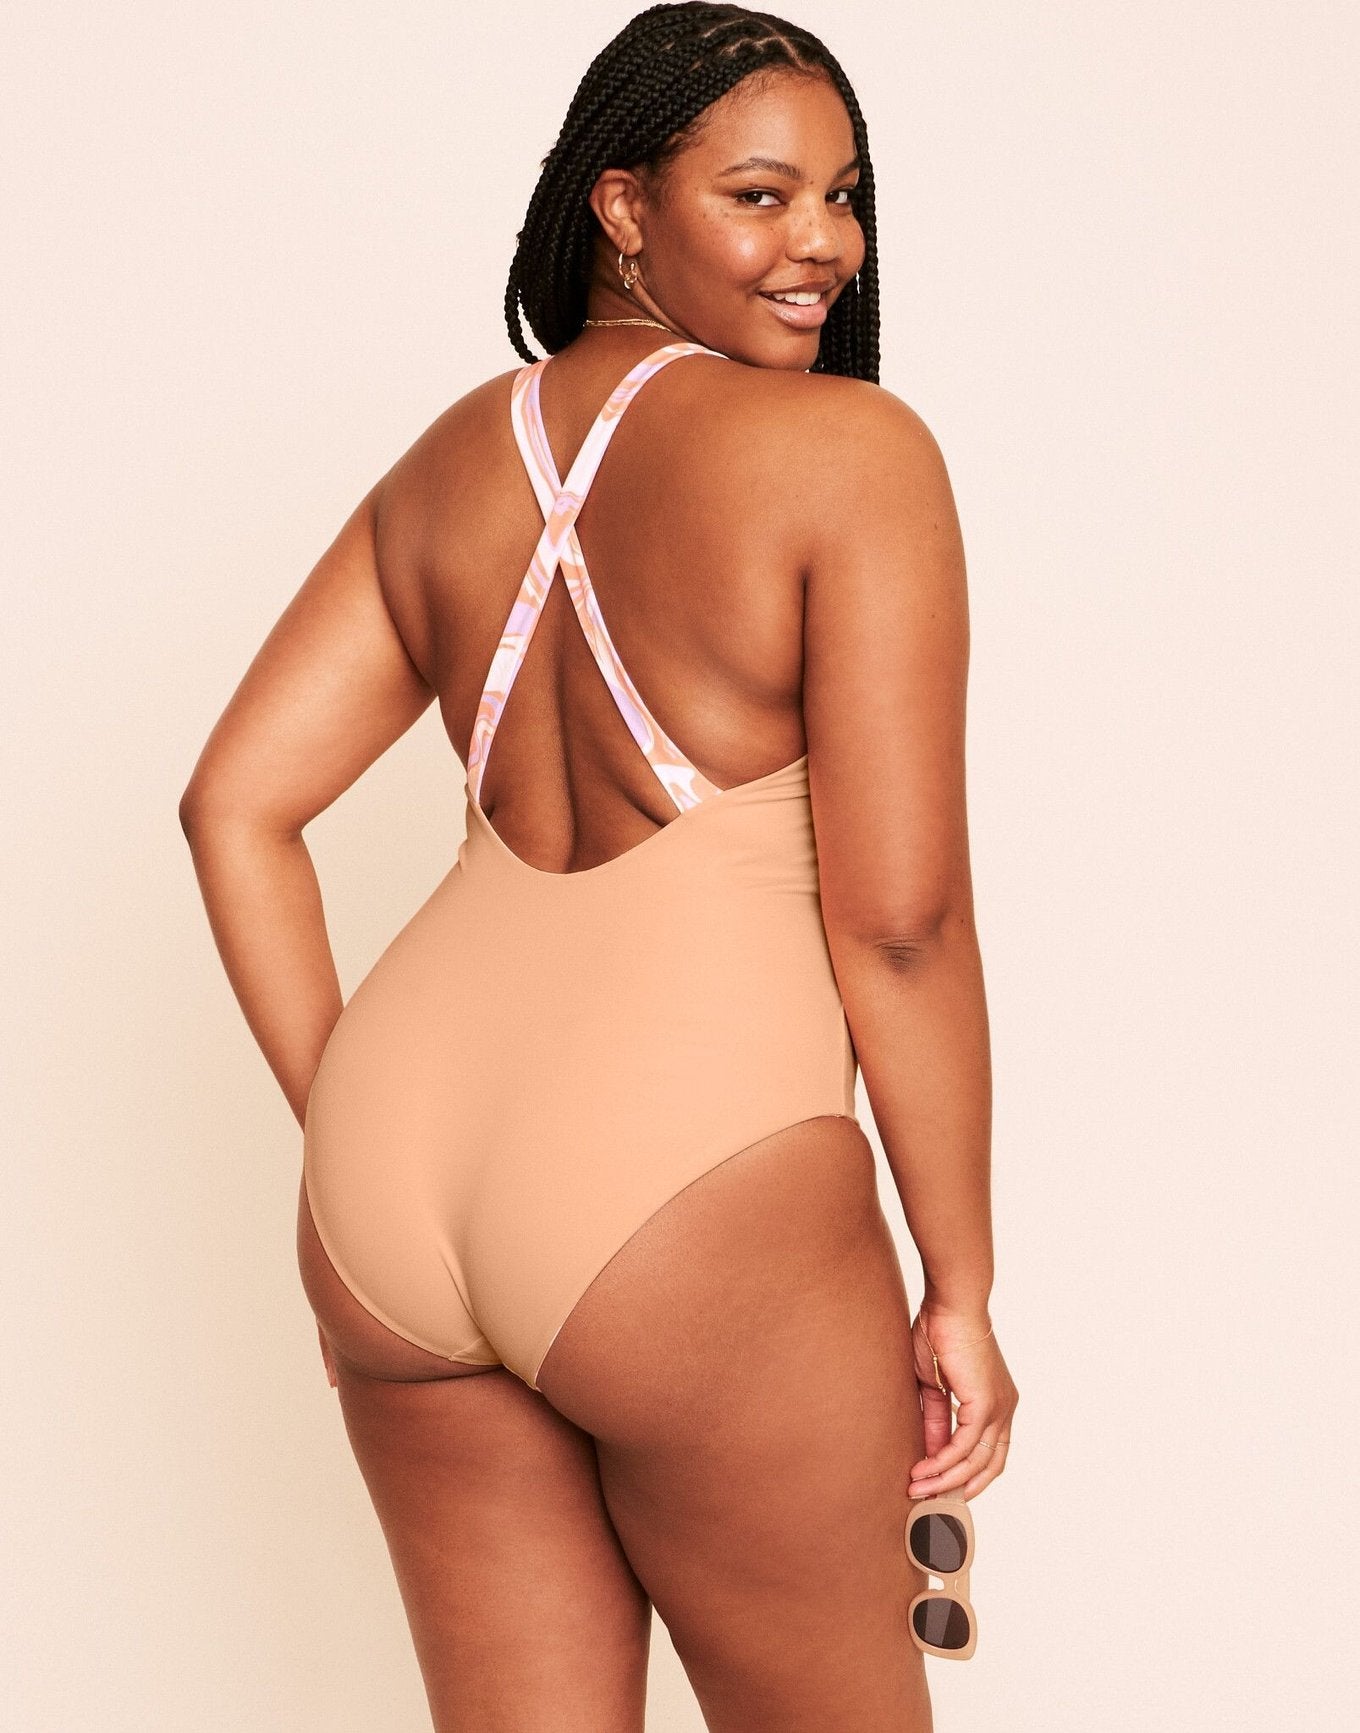 Earth Republic Serenity Reversible One Piece Reversible One-Piece in color PR171253 and shape one piece